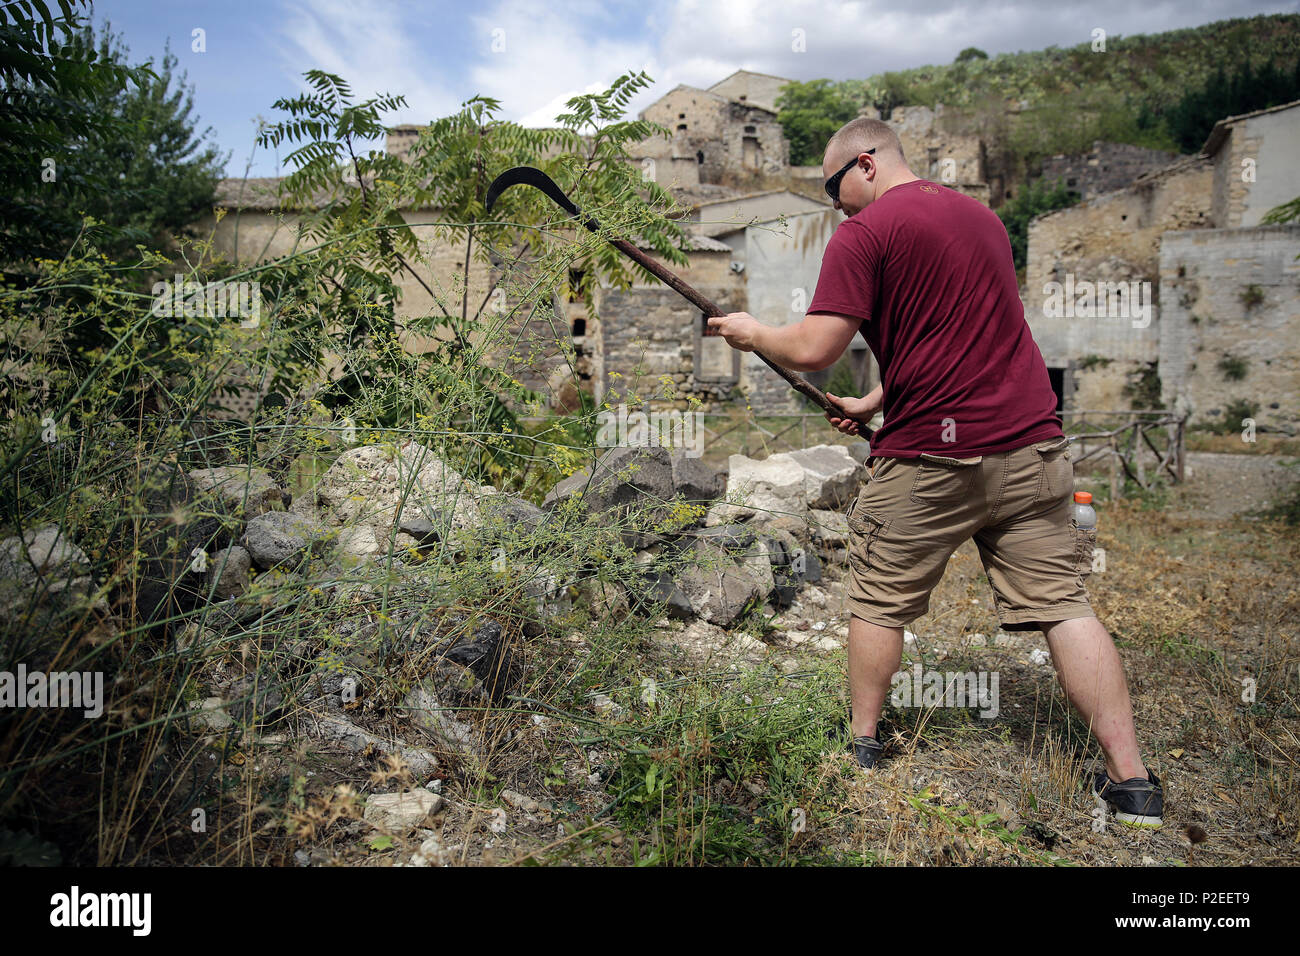 RPSA Alexander Varner, religious personnel with Special Purpose Marine Air-Ground Task Force Crisis Response-Africa, cuts down weeds and overgrowth with a sickle in Vizzini, Sicily, Sept. 7, 2016.  Marines volunteered to clean up a local historic site and build fences during a community relations project.  (U.S. Marine Corps photo by Cpl. Alexander Mitchell/released) Stock Photo